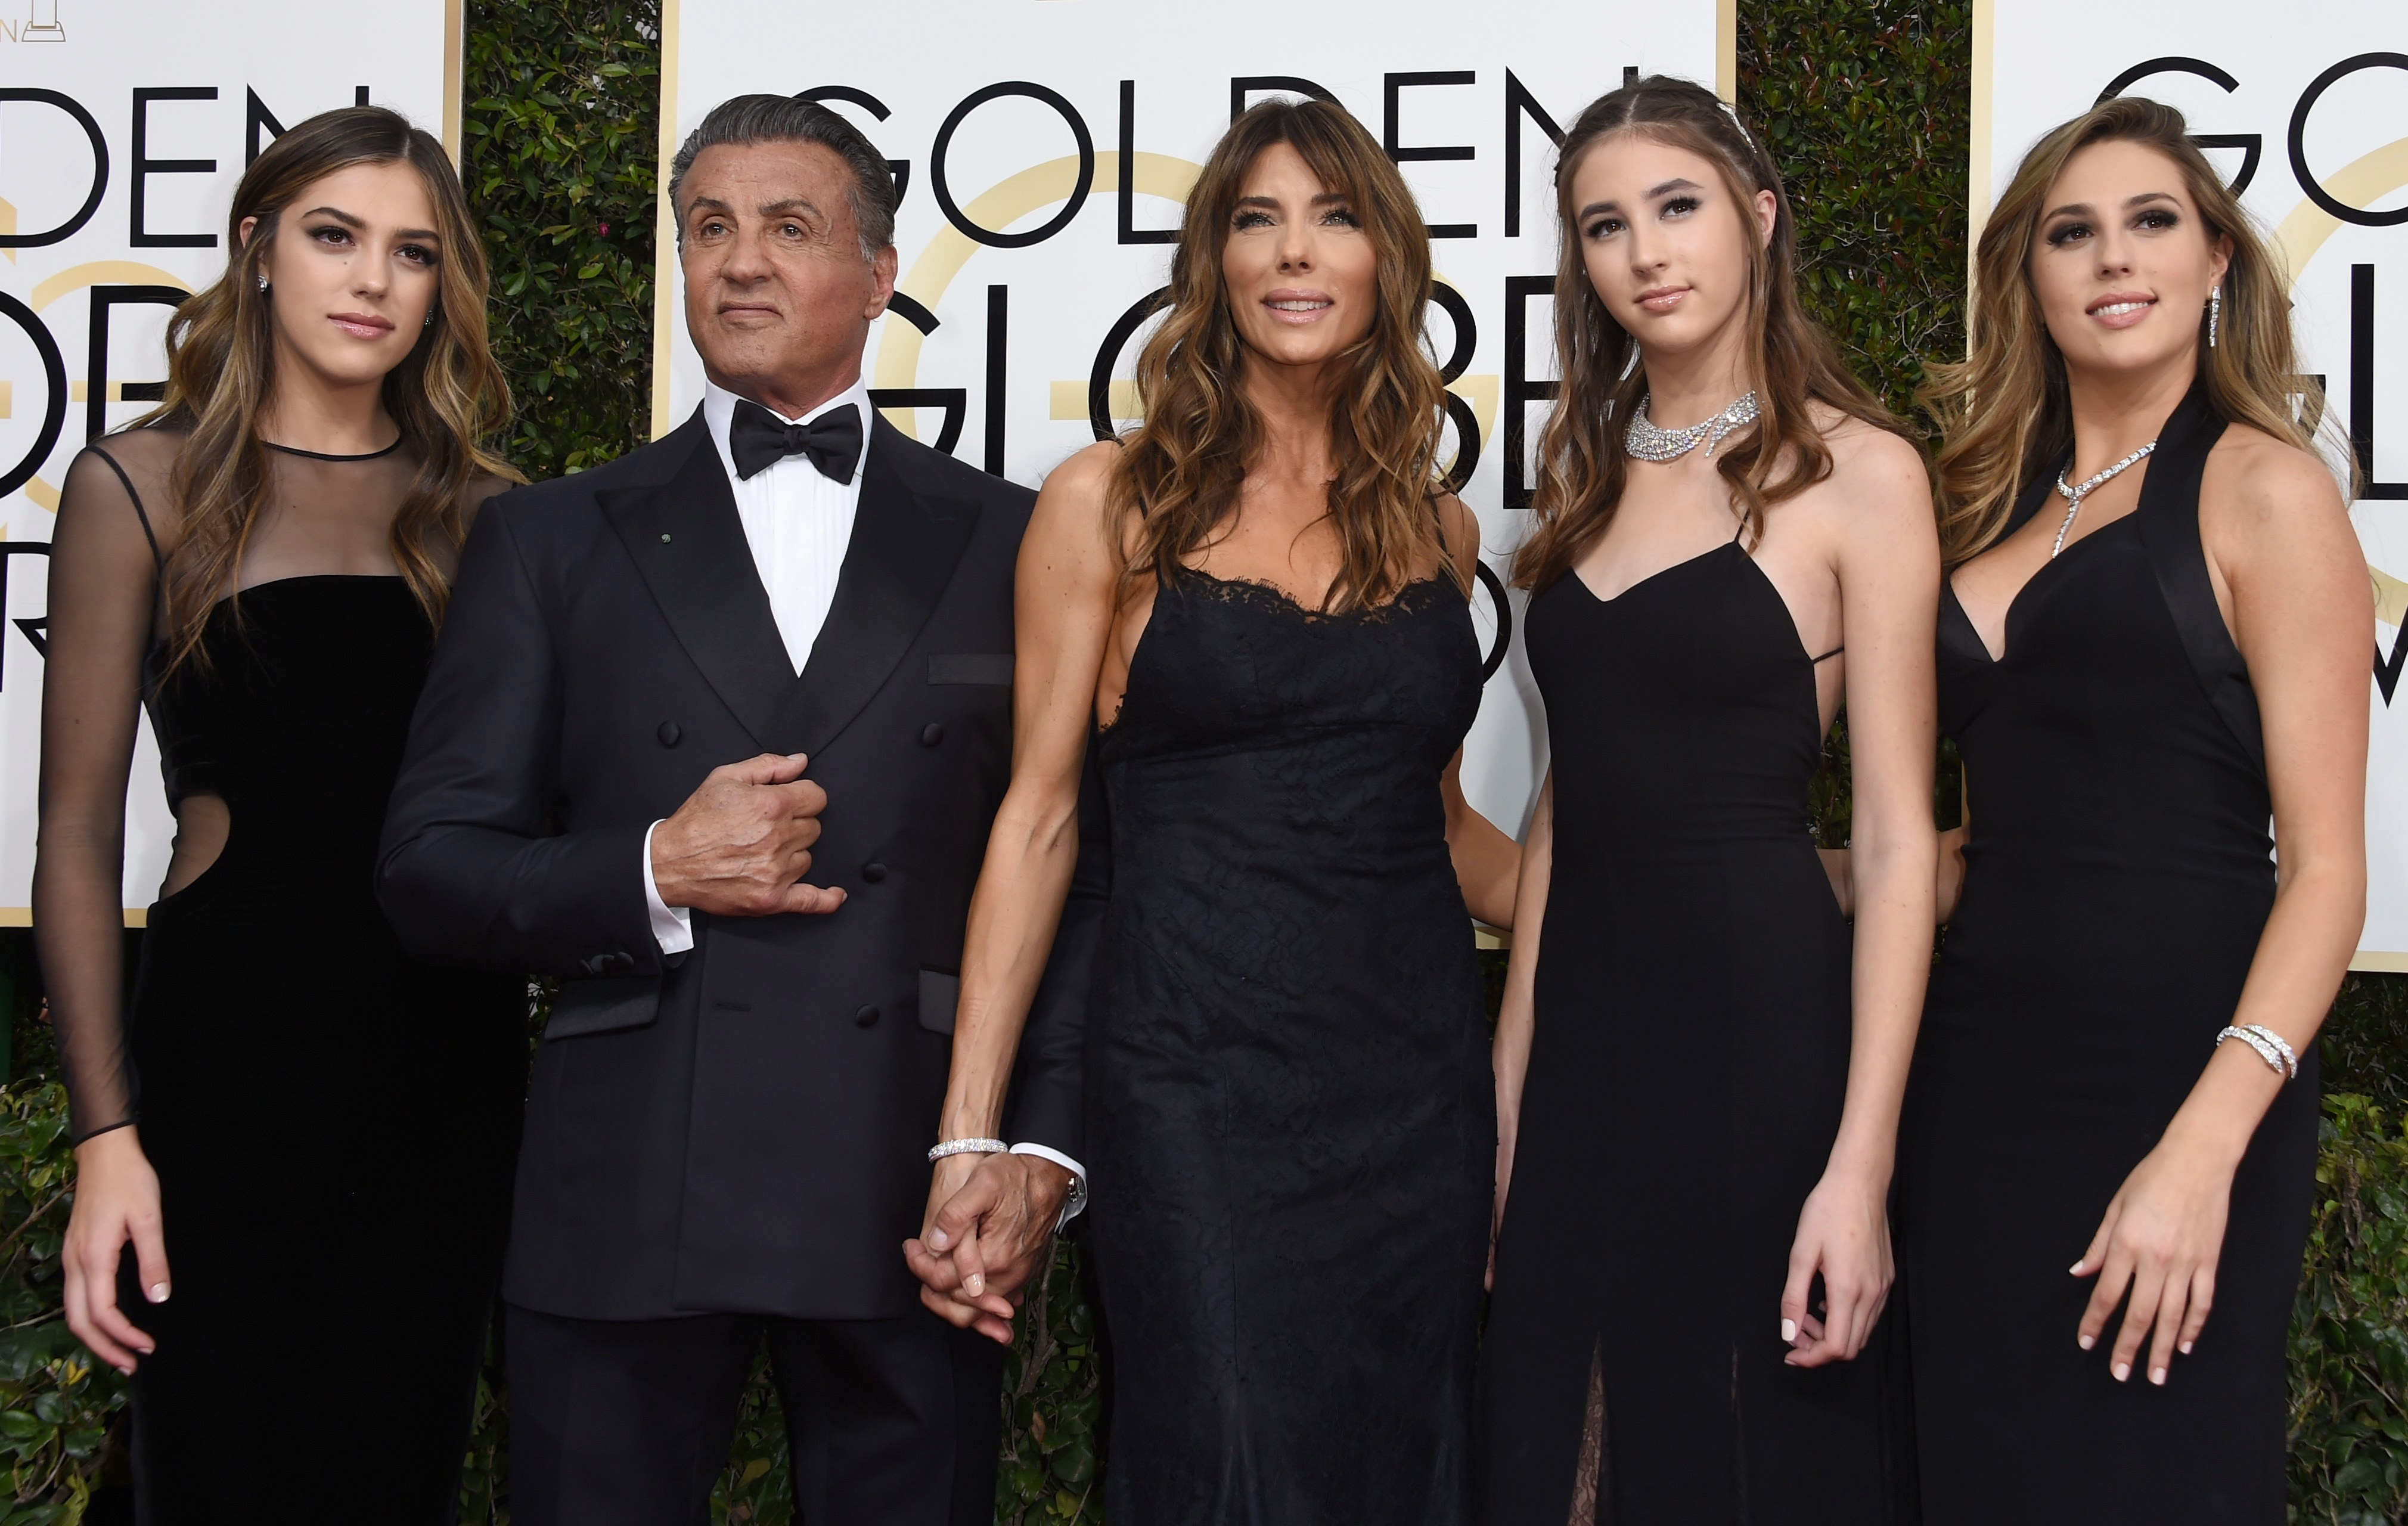 Jennifer Flavin, Sylvester Stallone’s Wife 5 Fast Facts